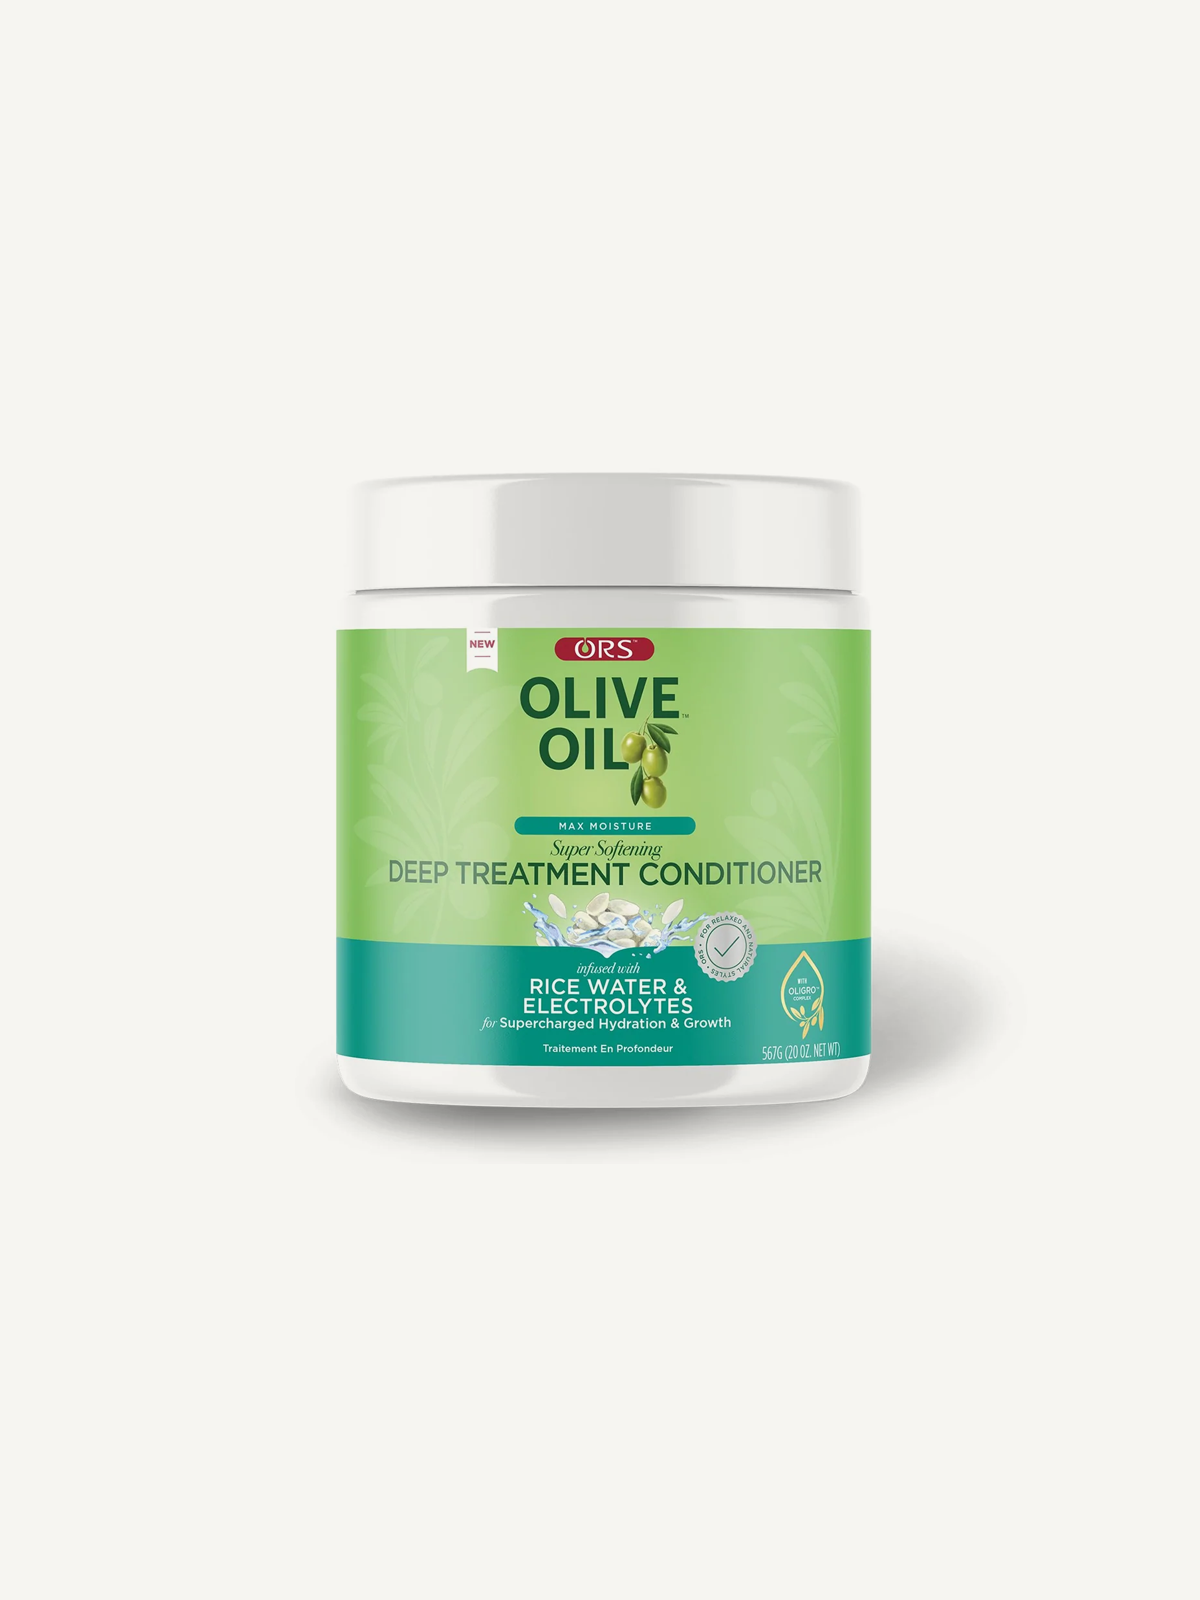 ORS – Olive Oil Rice Water & Electrolytes Deep Treatment Conditioner